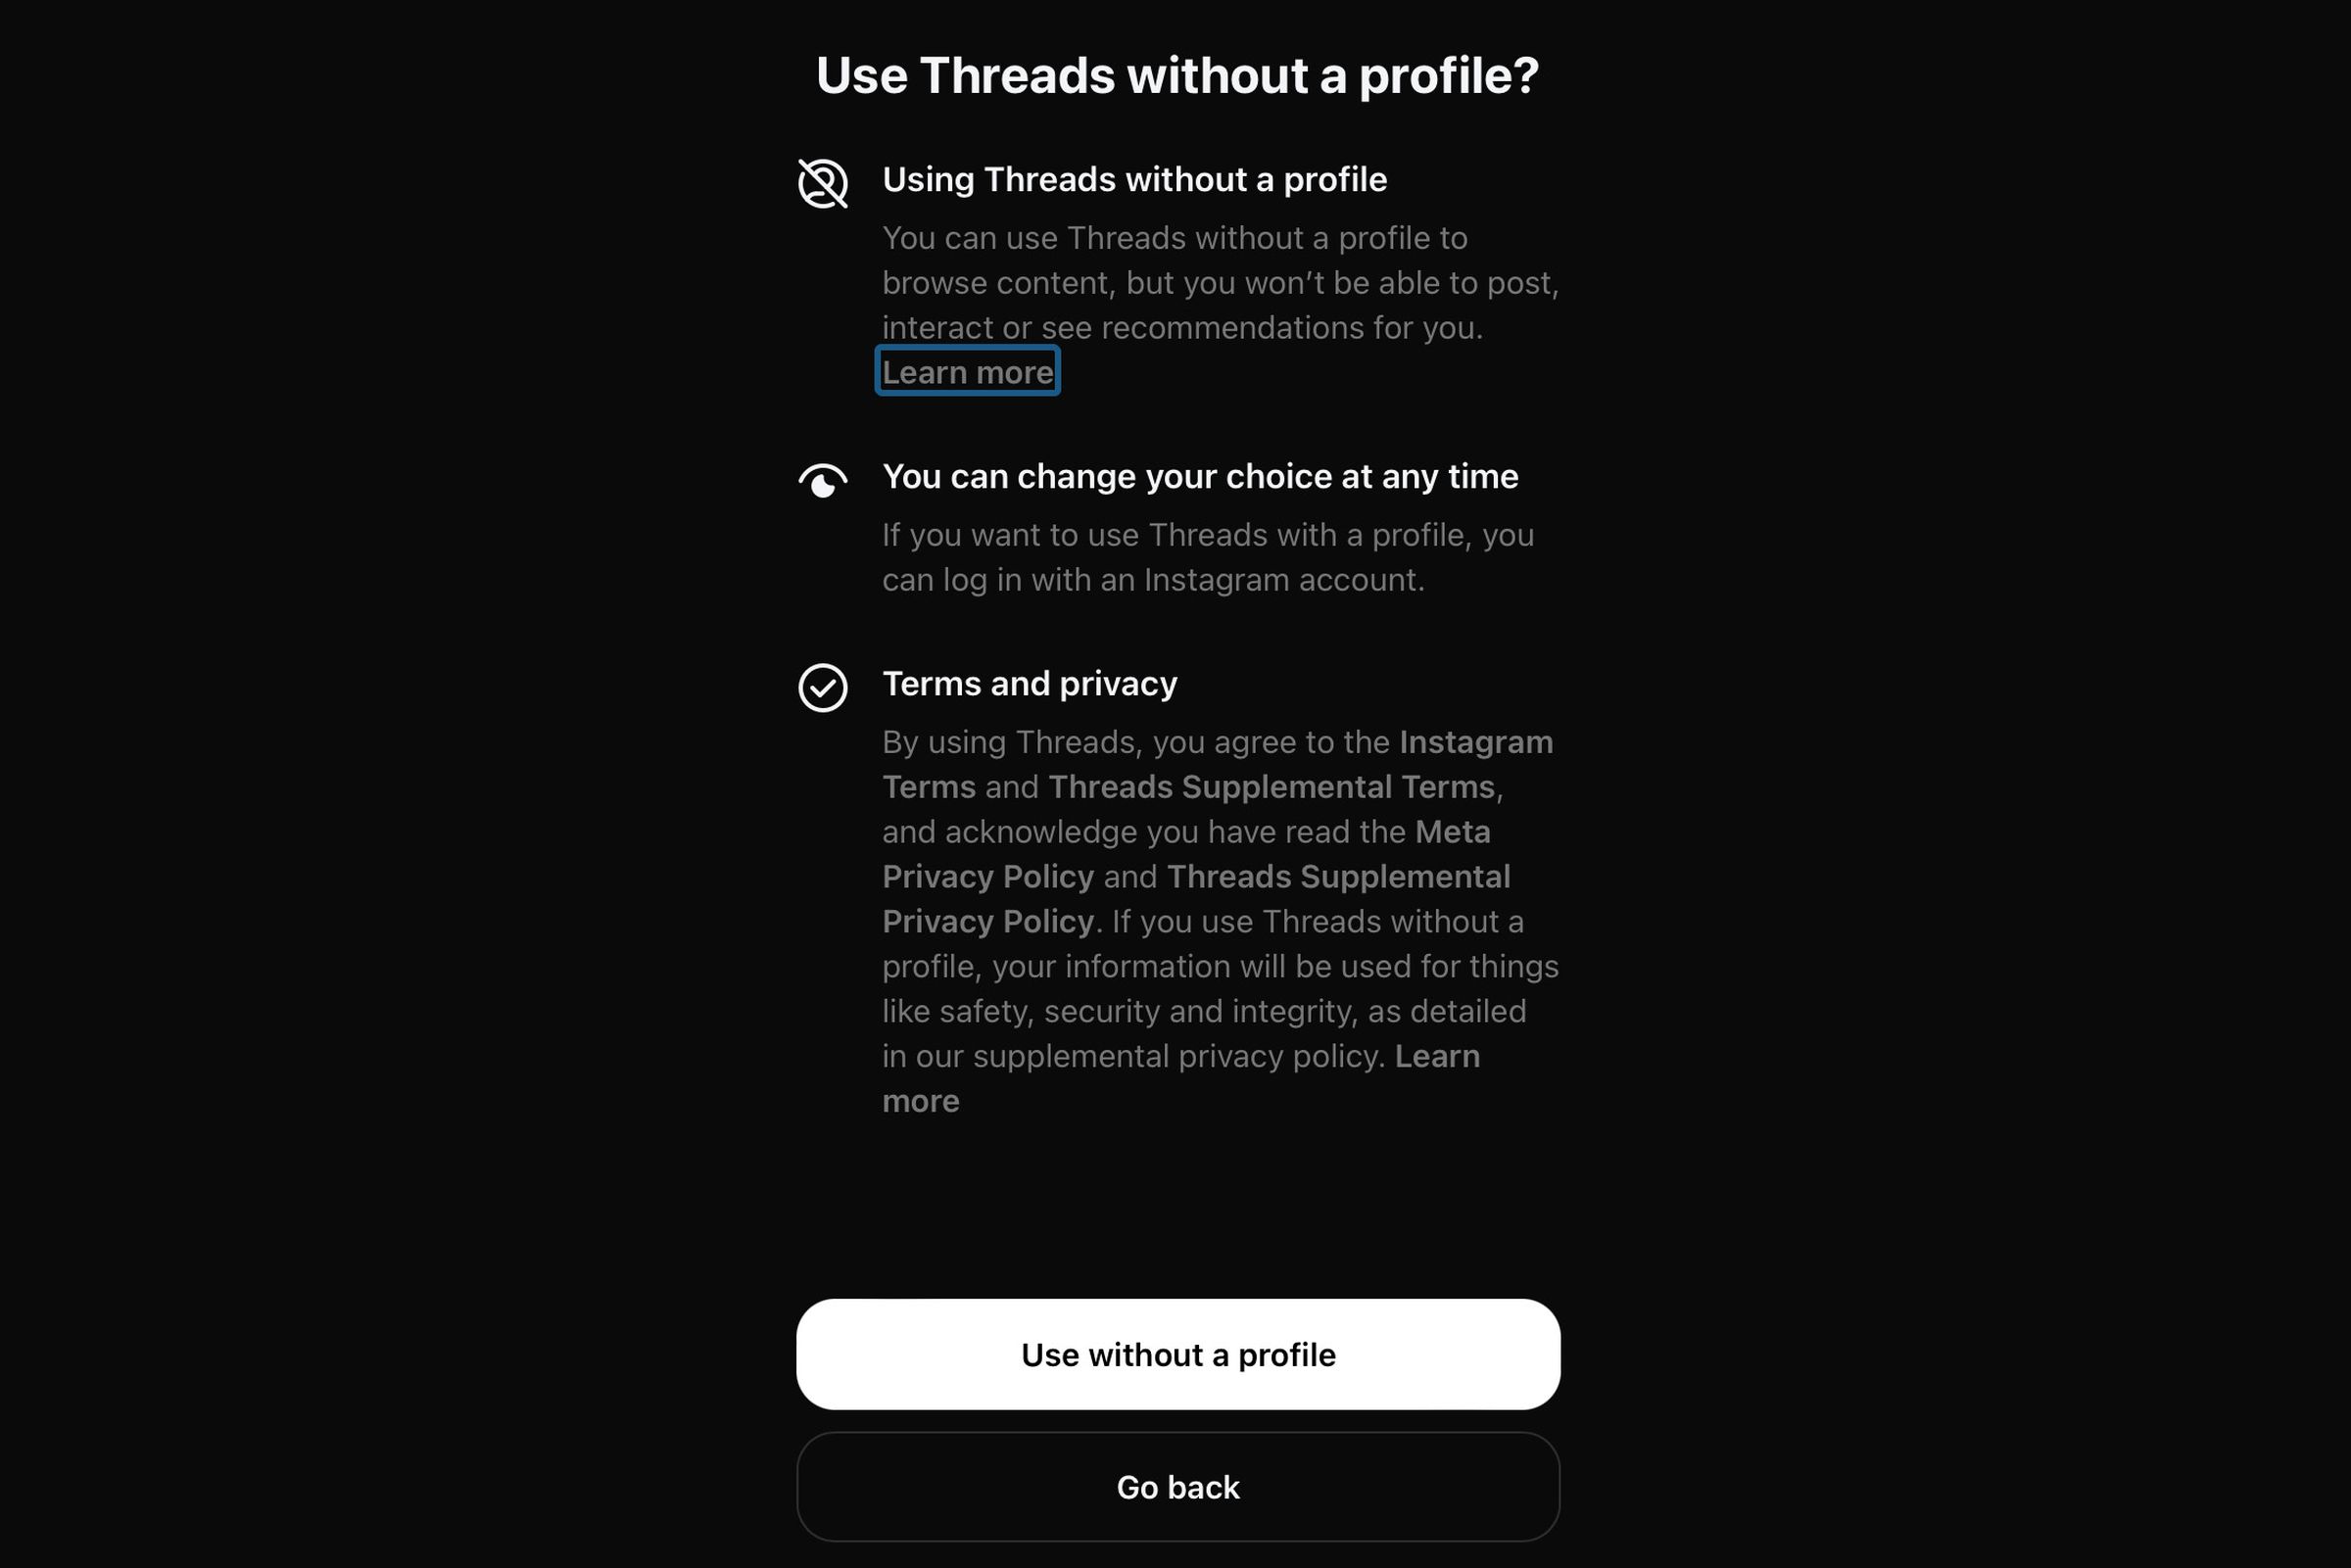 Info screen about using Threads without a profile.